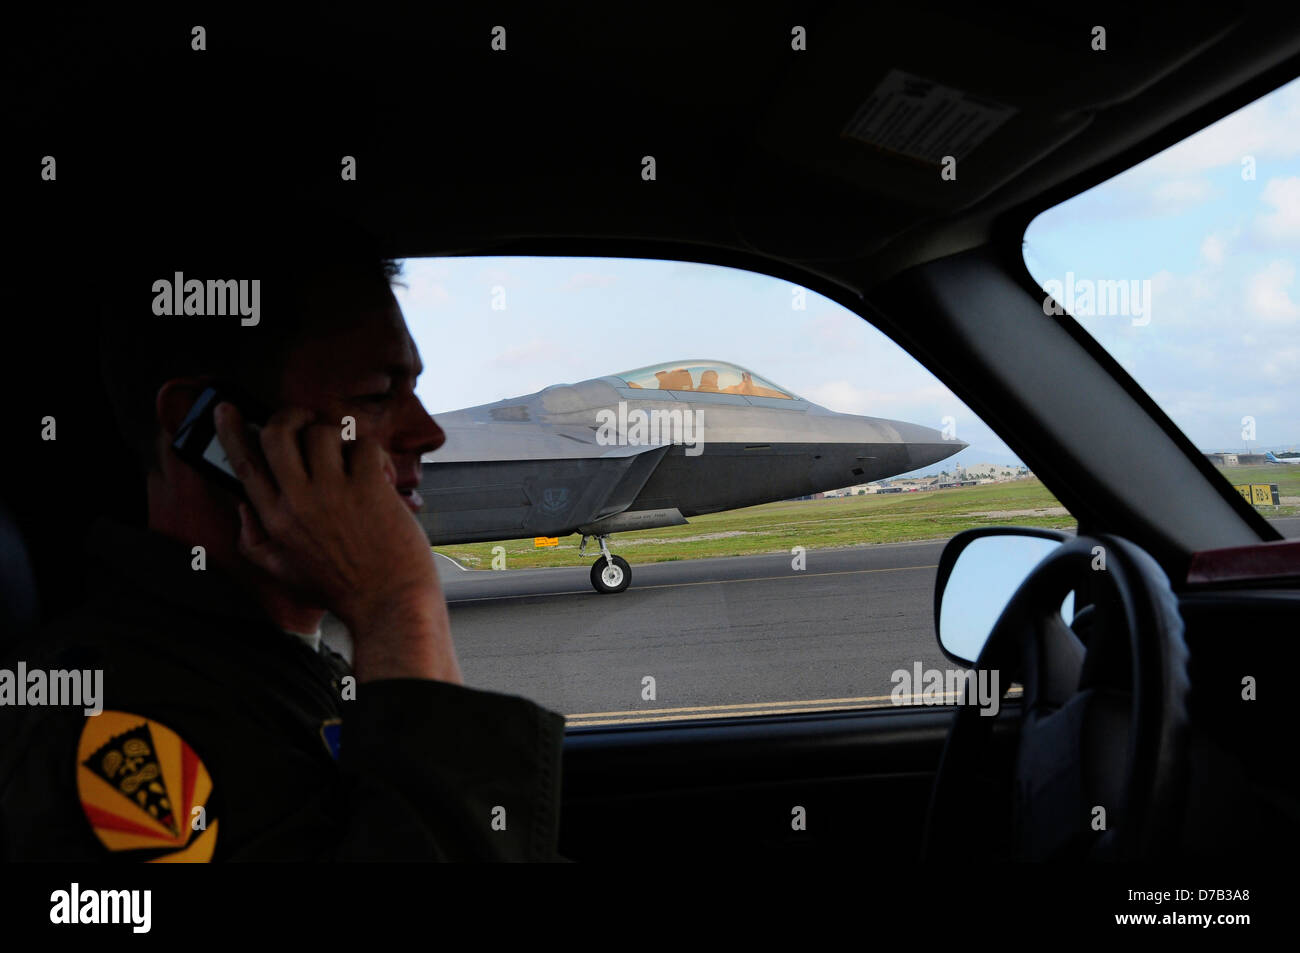 A US Air Force F-22 Raptor stealth fighter aircraft takes off as a security team member watches from his car along the runway April 6, 2013 at Joint Base Pearl Harbor-Hickam, Hawaii. Stock Photo